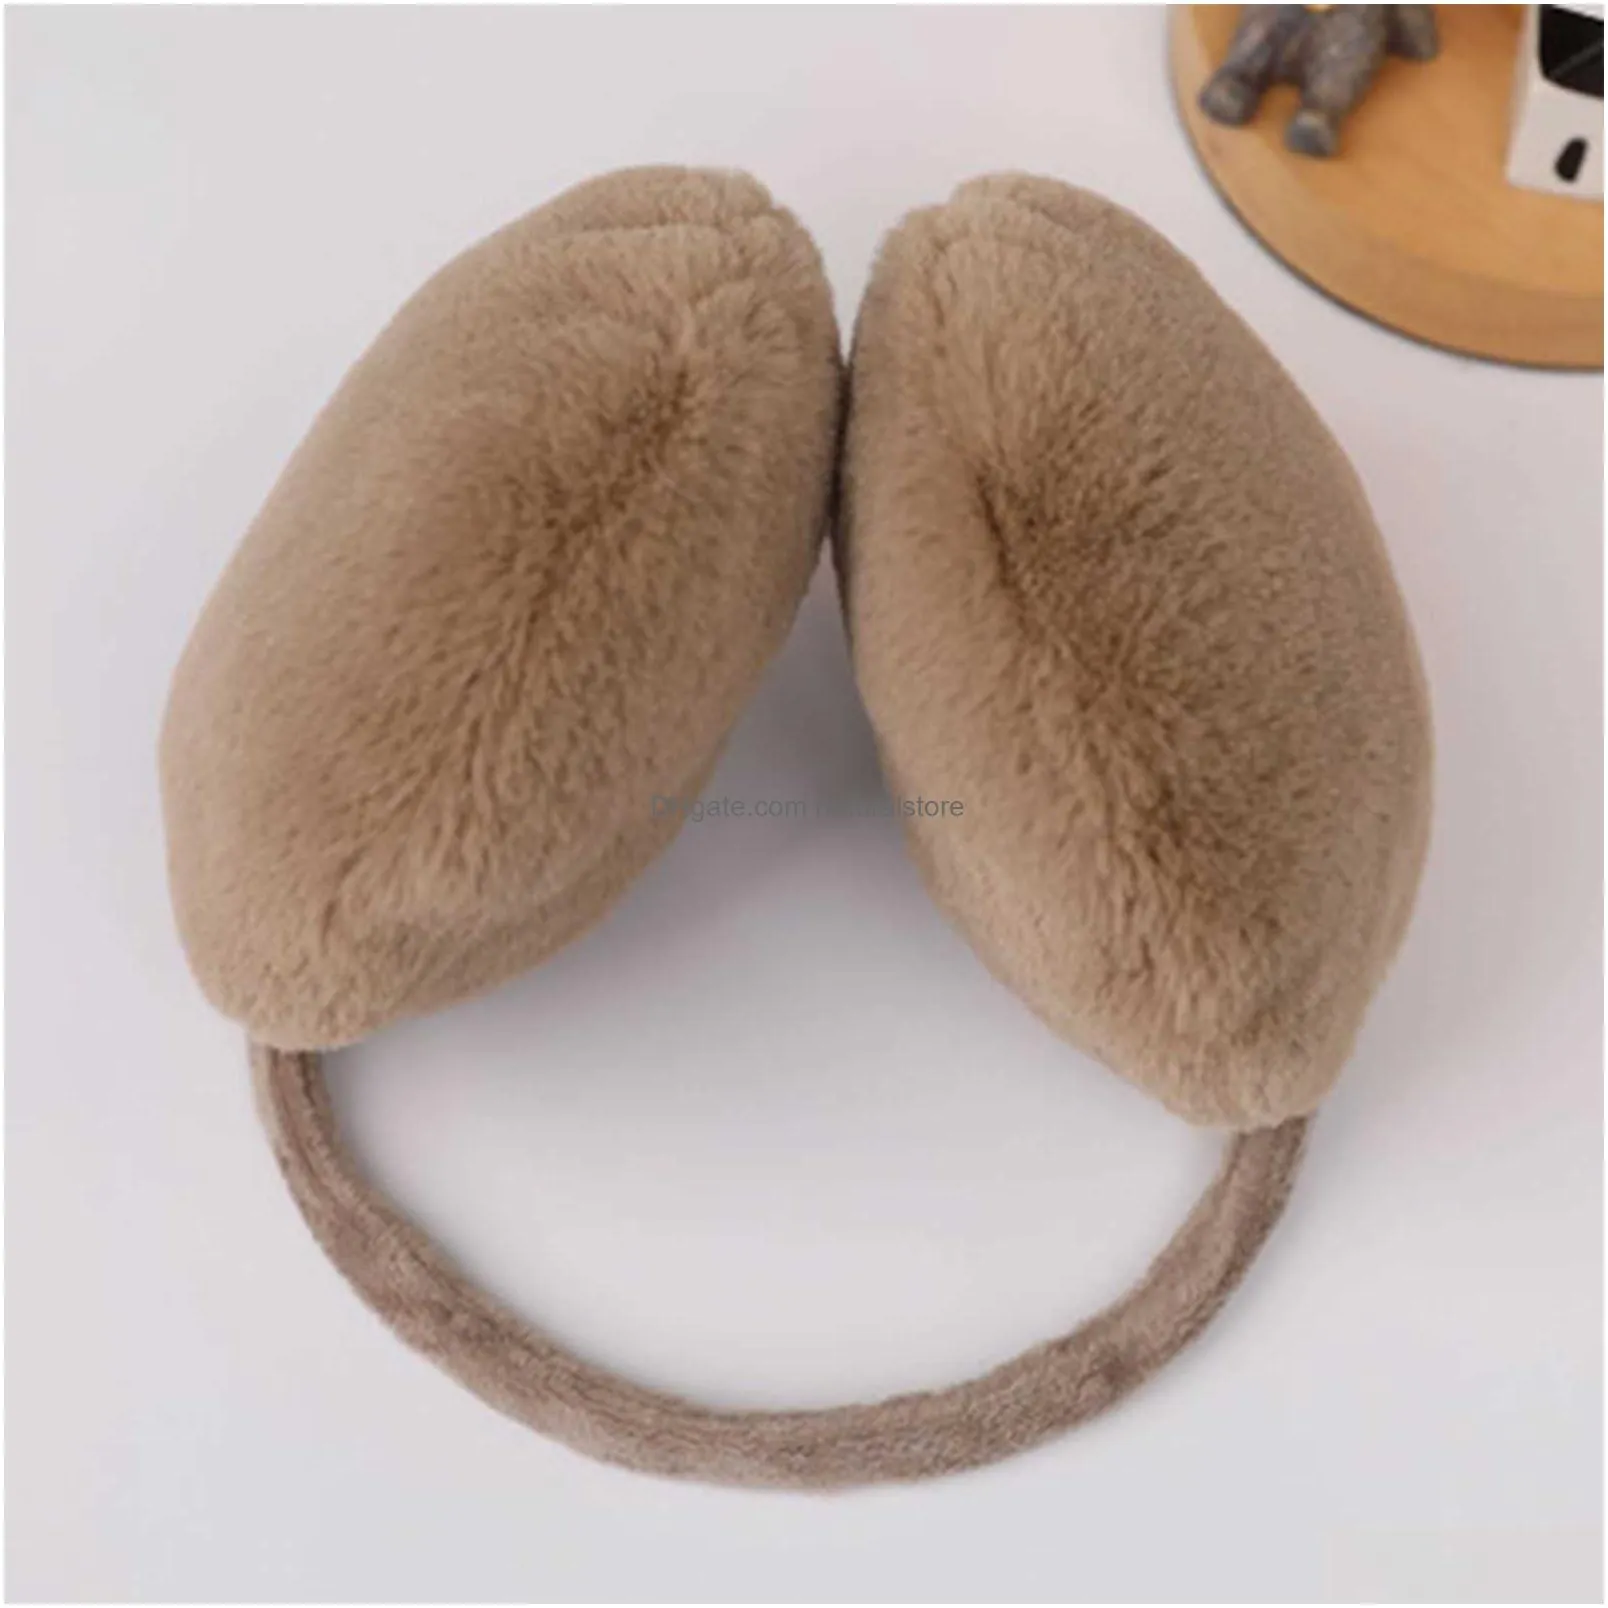 Ear Muffs Ear Muffs New Winter Earmuffs Warmth Plush Warm Ears Boy Girl Outdoor Solid Color Soft Cozy Casual R231009 Drop Delivery Fas Dhgft